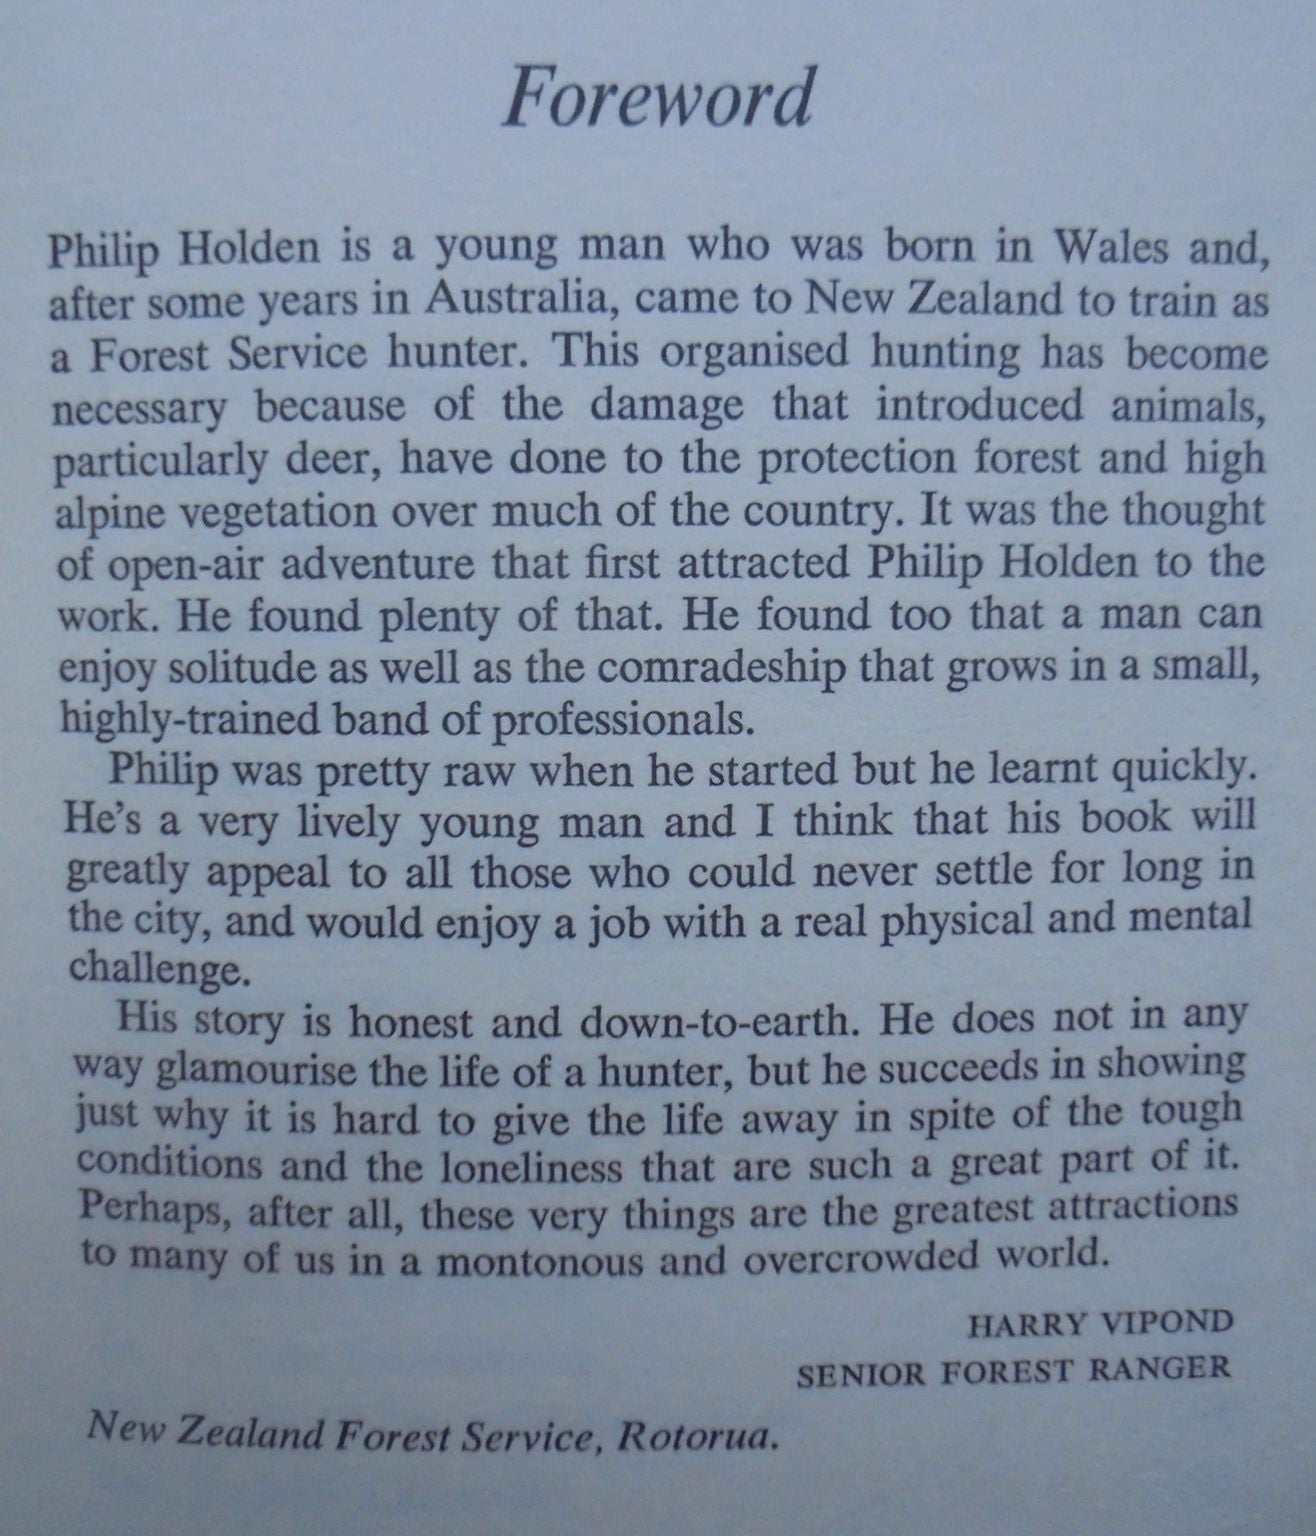 Pack and Rifle (First Edition). By Phlip Holden